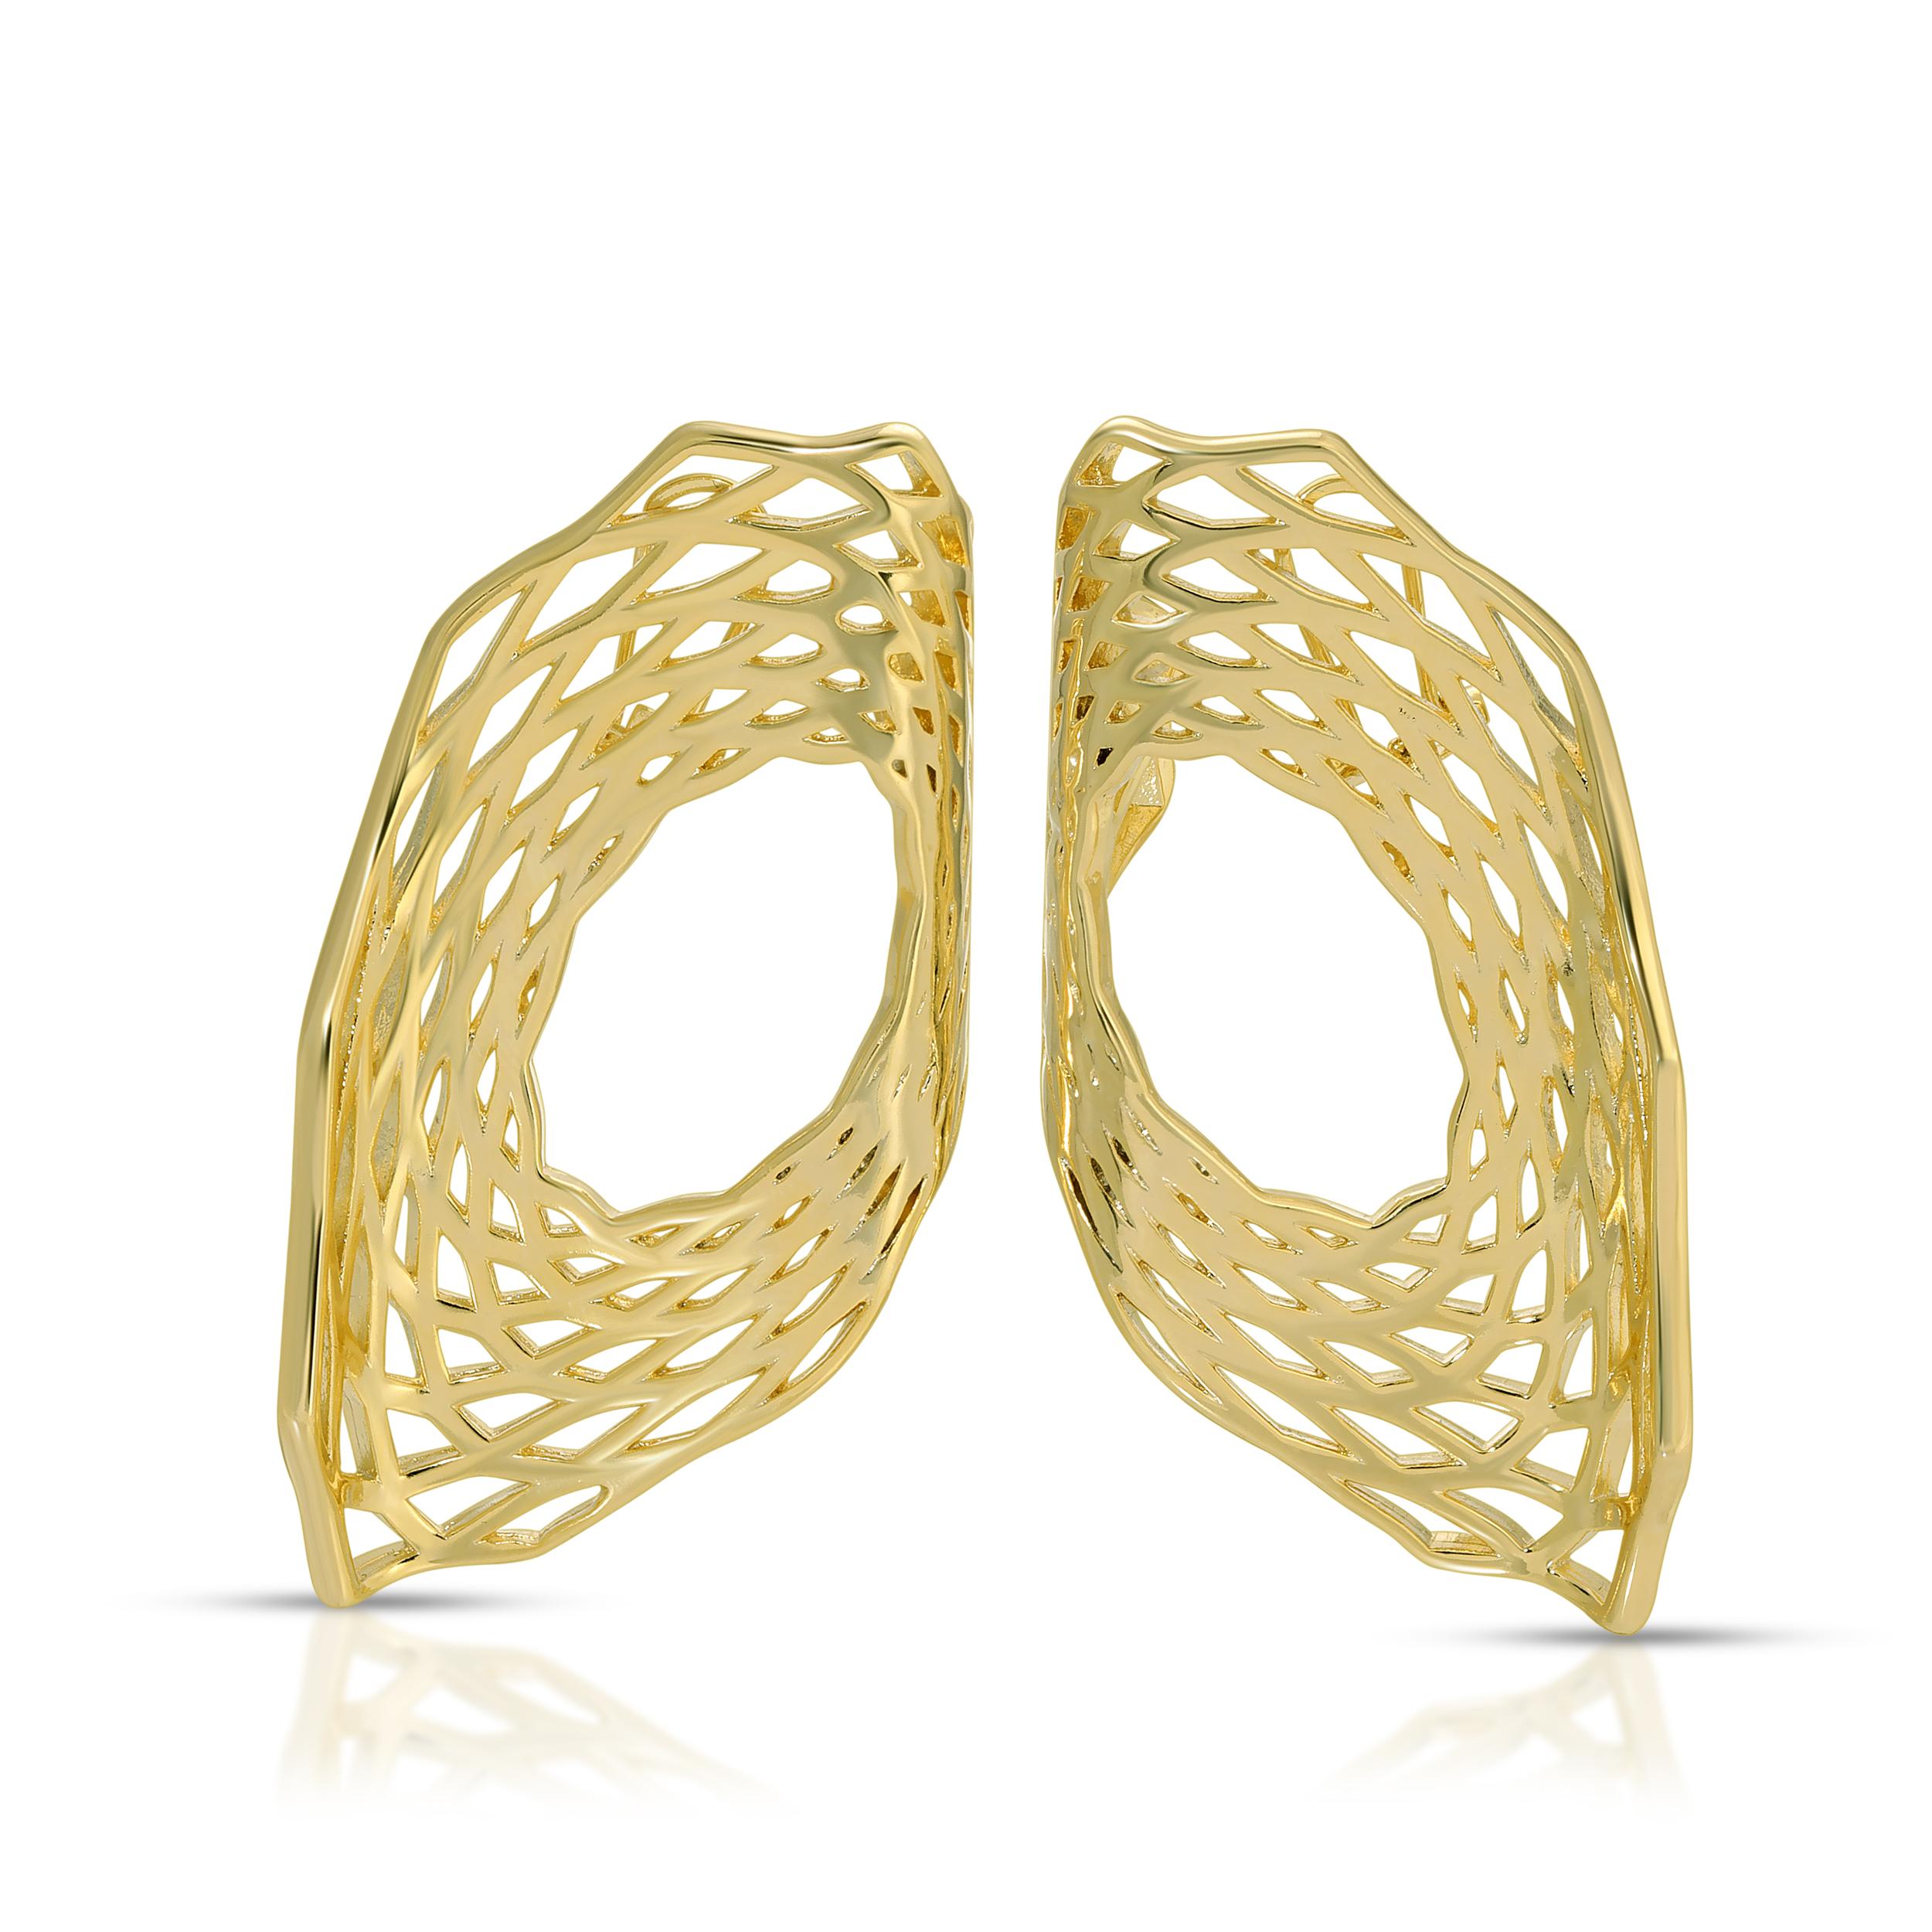 Who says geometry has to be perfect? The Nisa folded Earrings are proof that breaking the rules can be fun - and stylish! These earrings feature a geometric pattern that's been perfectly drawn, but then twisted or folded to create a whole new form.